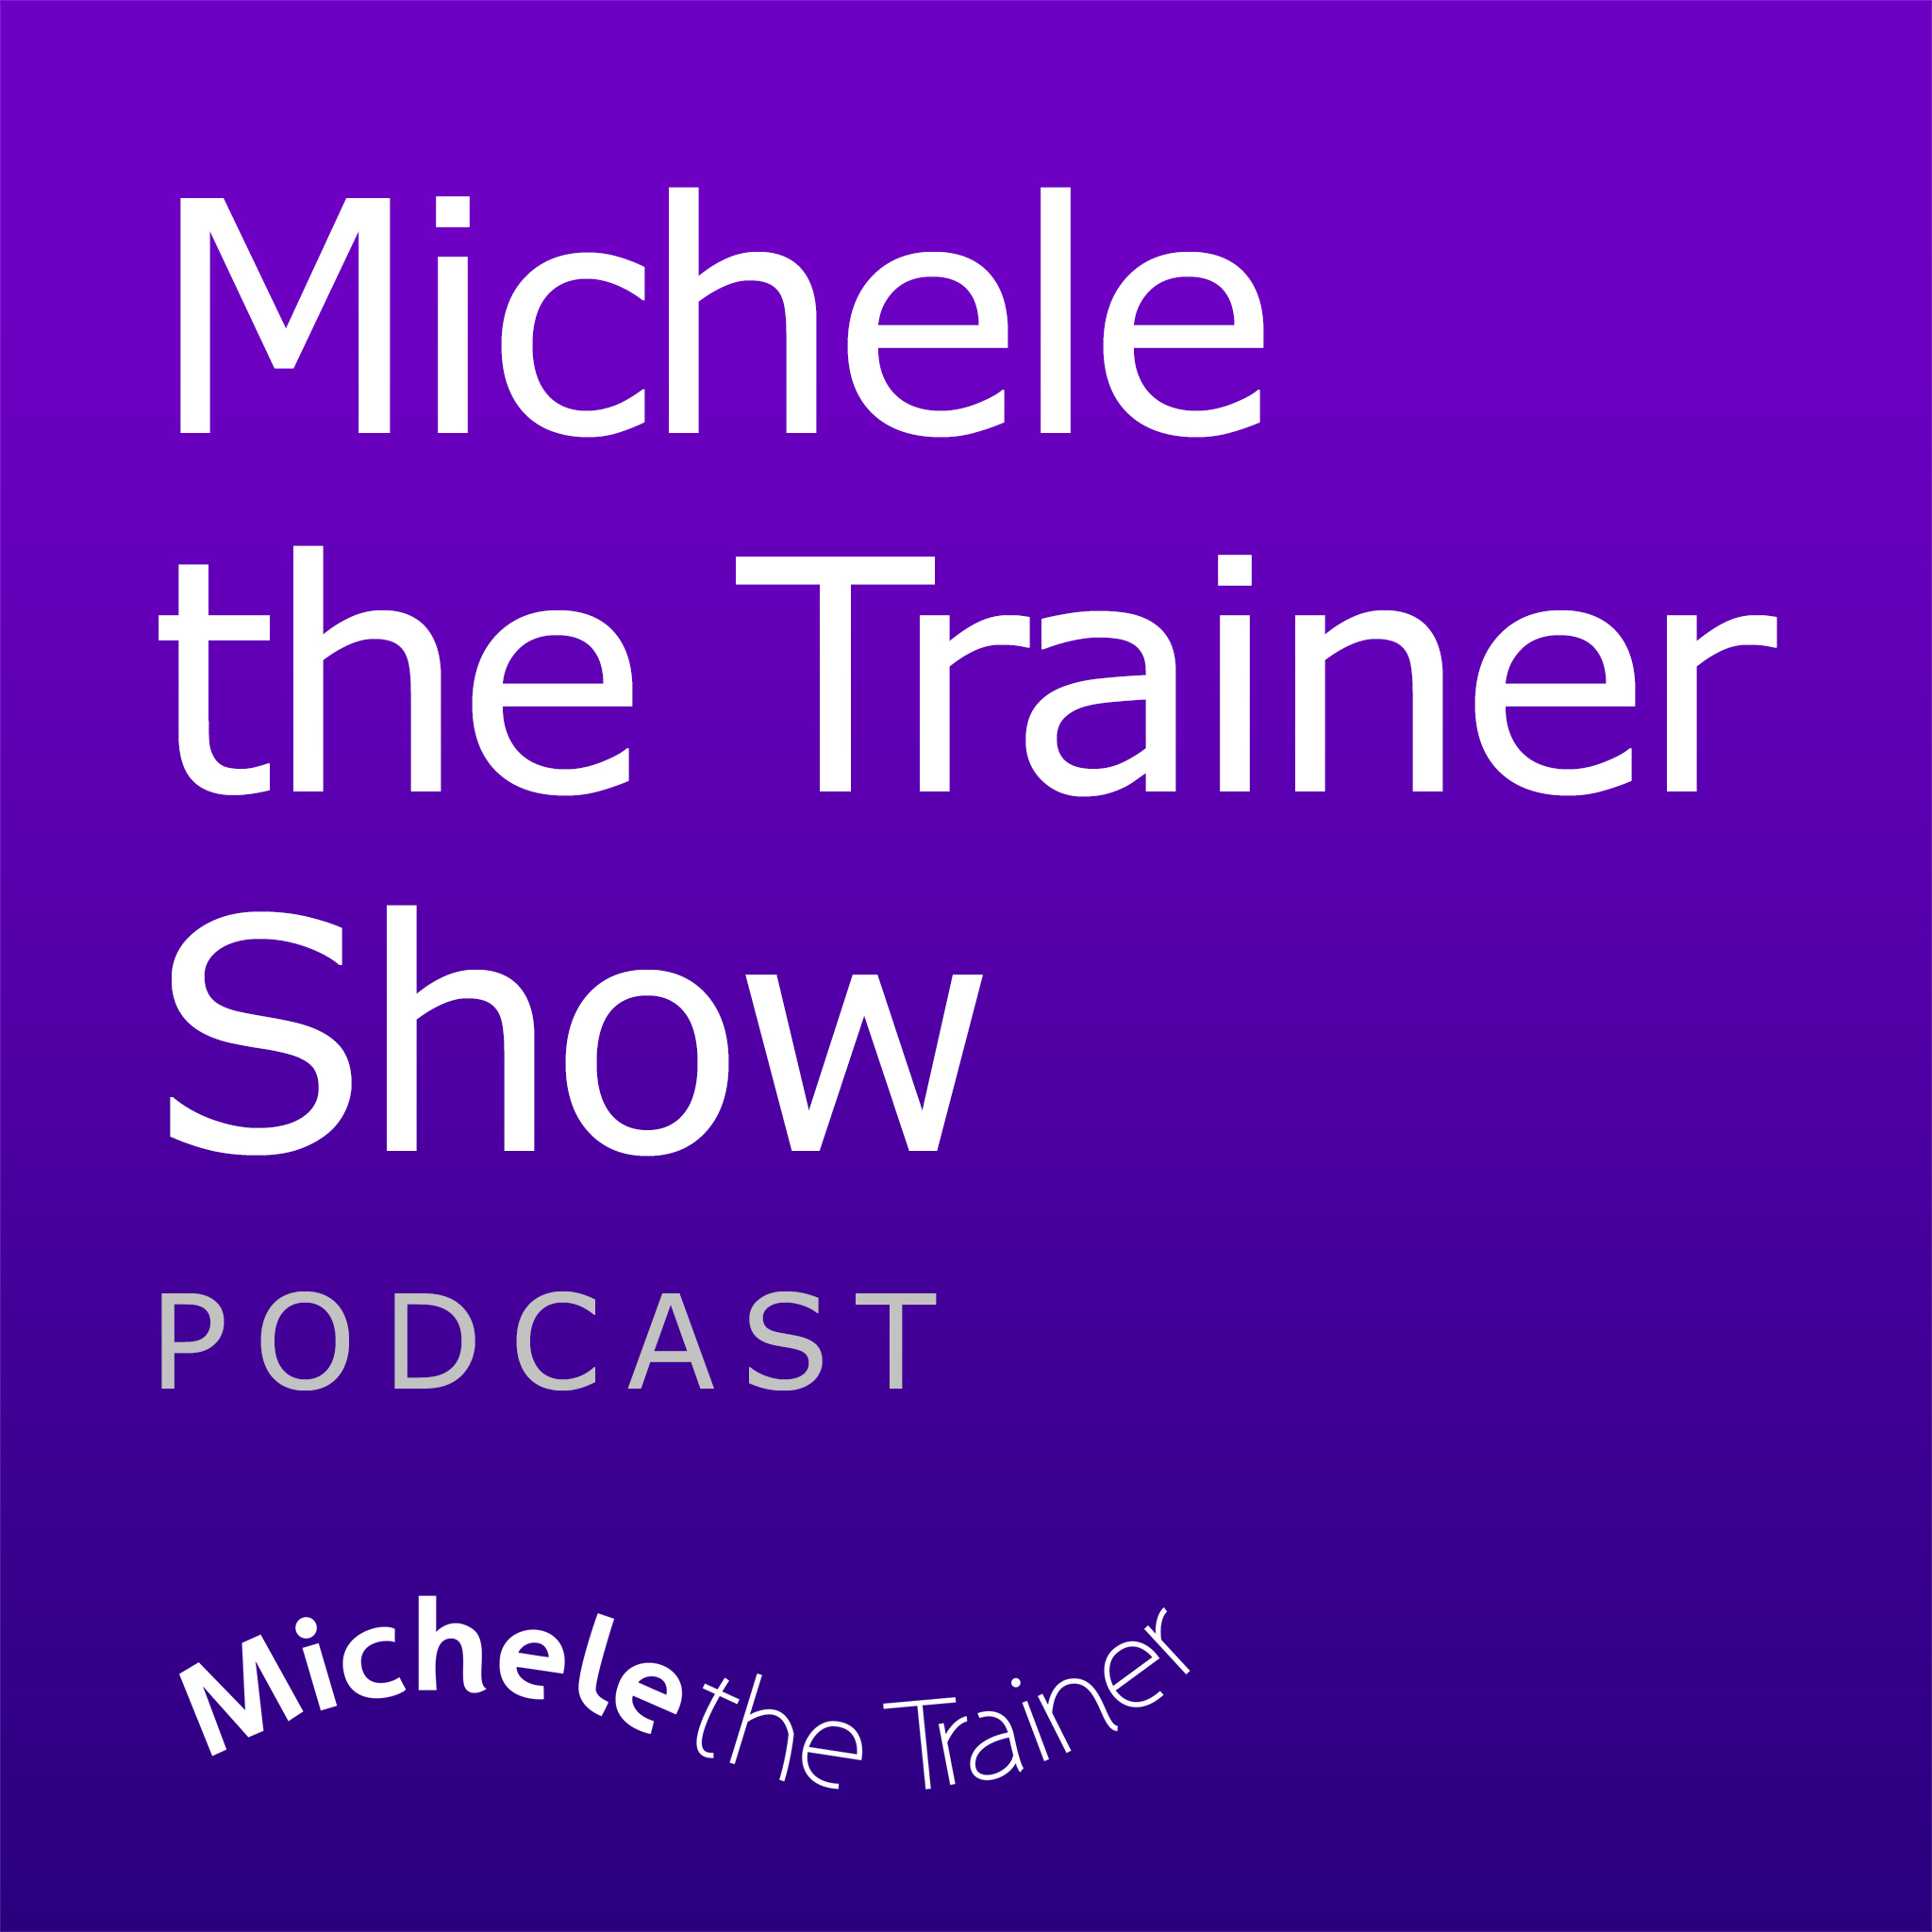 Michele the Trainer Show